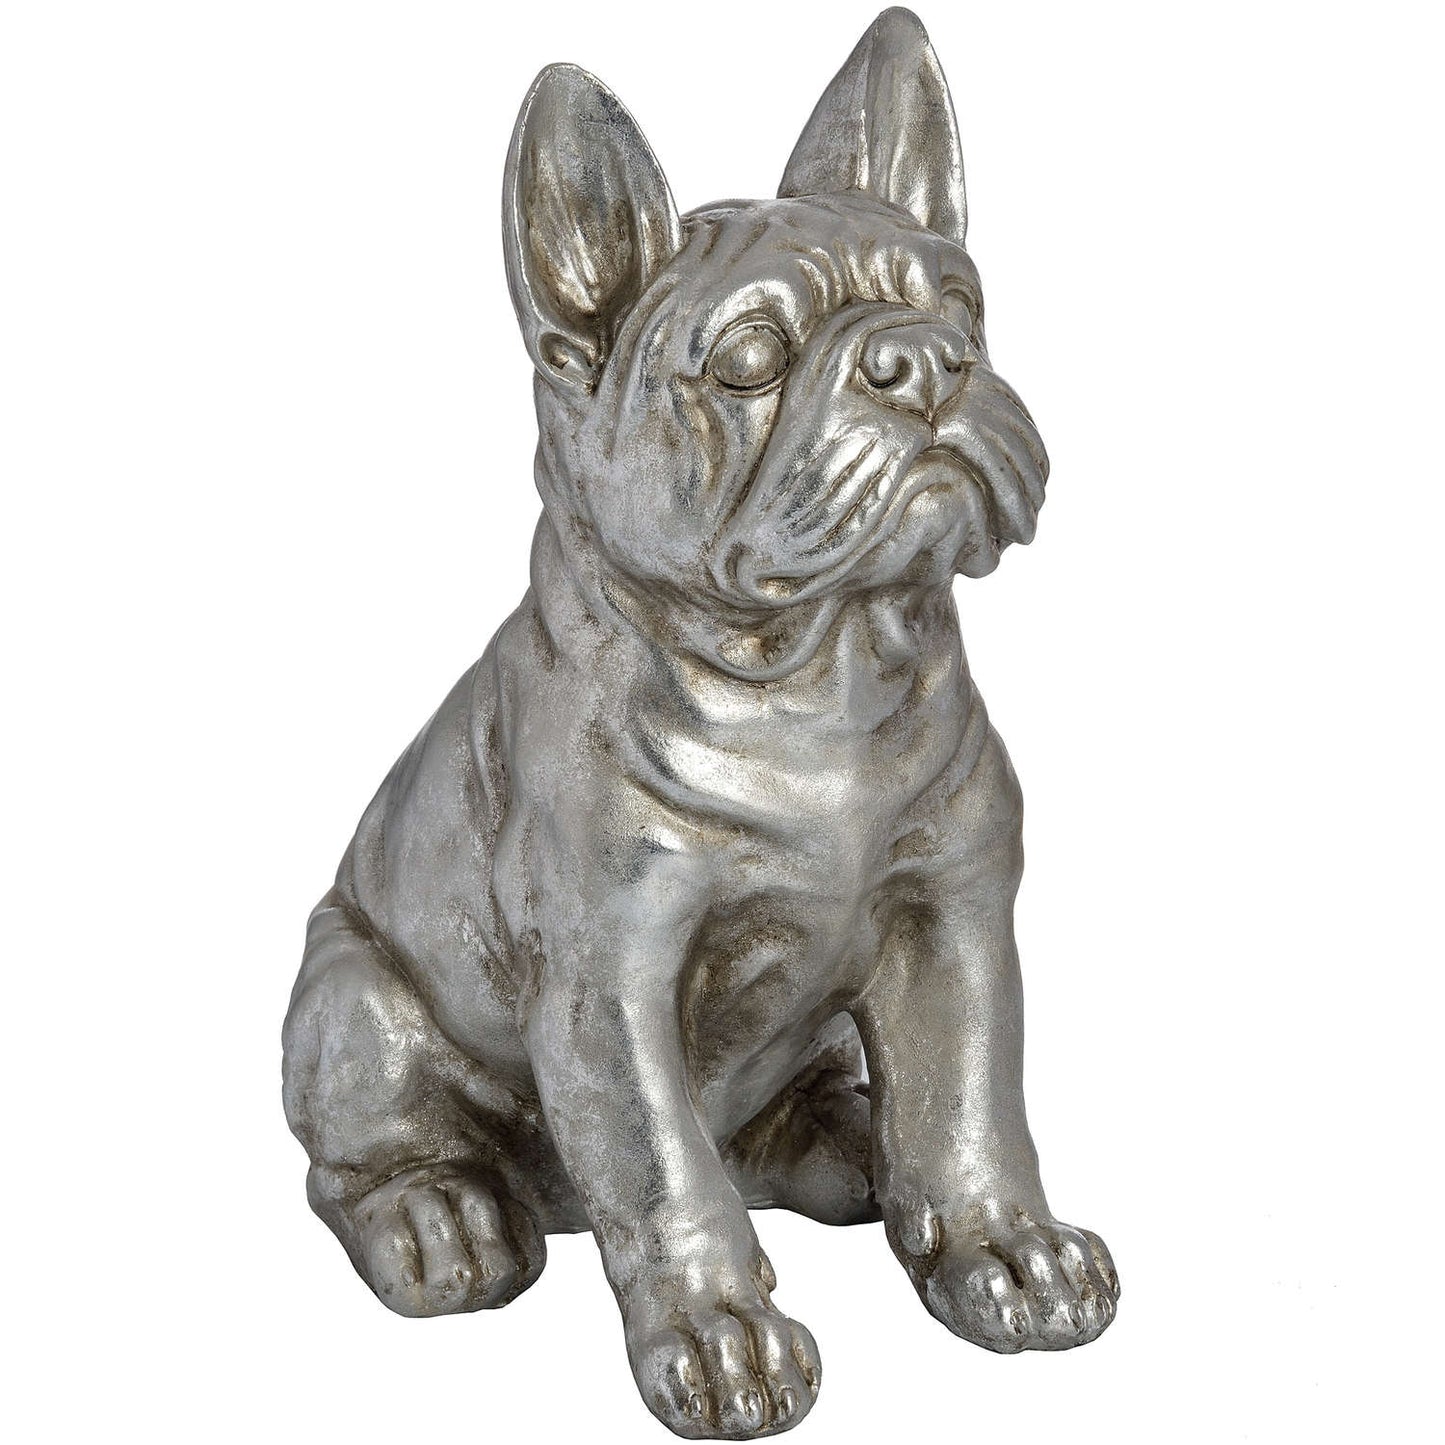 Antique Silver French Bull Dog